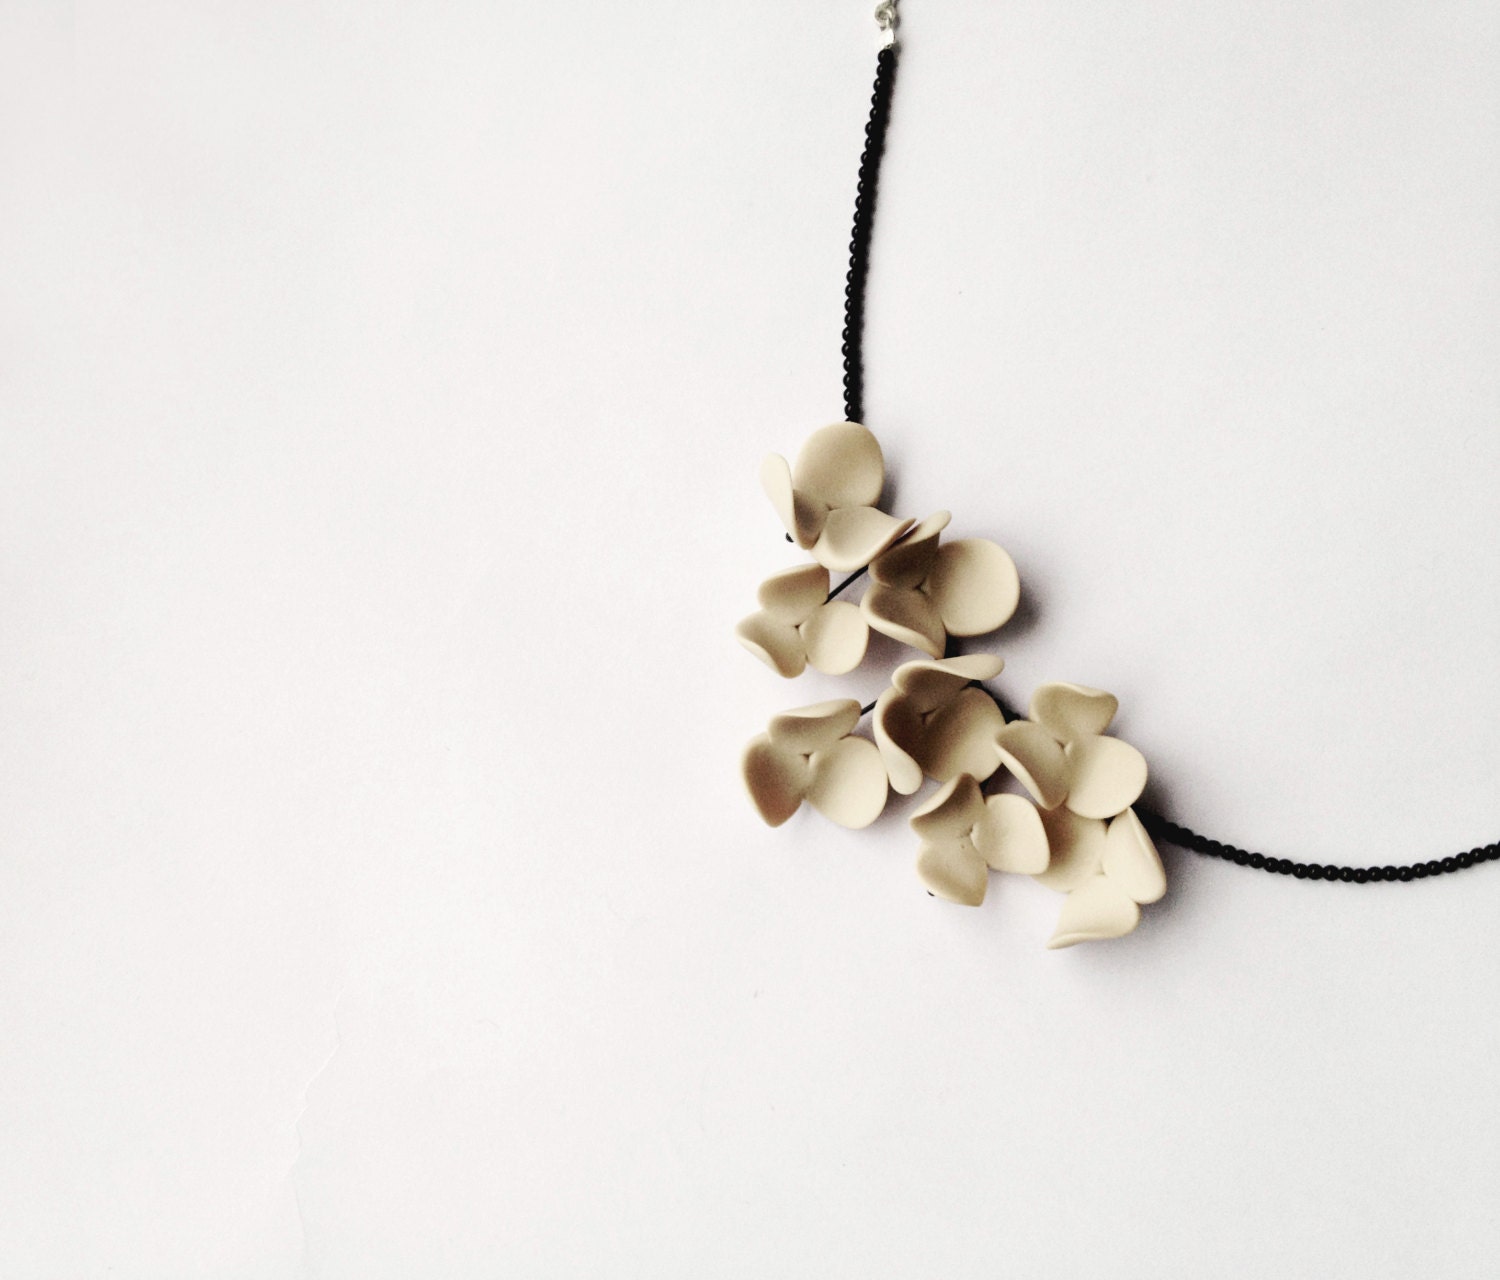 minimal chic polymer clay flowernecklace/nO.215 Jasmines between black onyx/ Made to order - eried